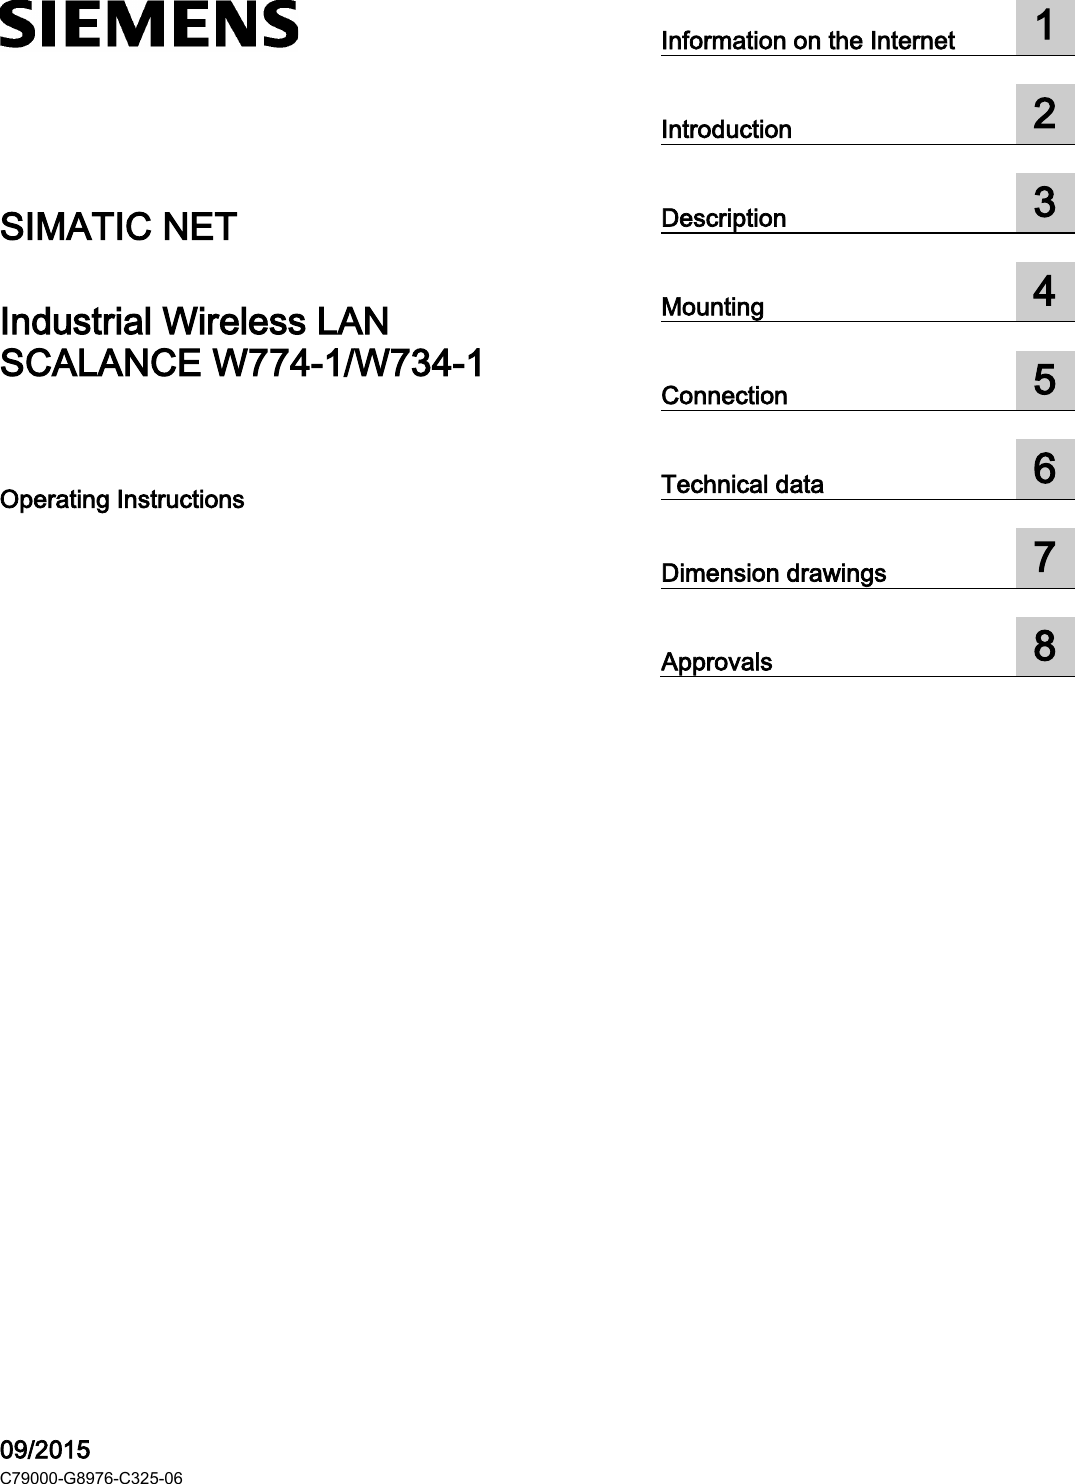   SCALANCE W770/W730  ___________________ ___________________ ___________________ ___________________ ___________________ ___________________ ___________________ ___________________  SIMATIC NET Industrial Wireless LAN SCALANCE W774-1/W734-1 Operating Instructions    09/2015 C79000-G8976-C325-06 Information on the Internet  1  Introduction  2  Description  3  Mounting  4  Connection  5  Technical data  6  Dimension drawings  7  Approvals  8  